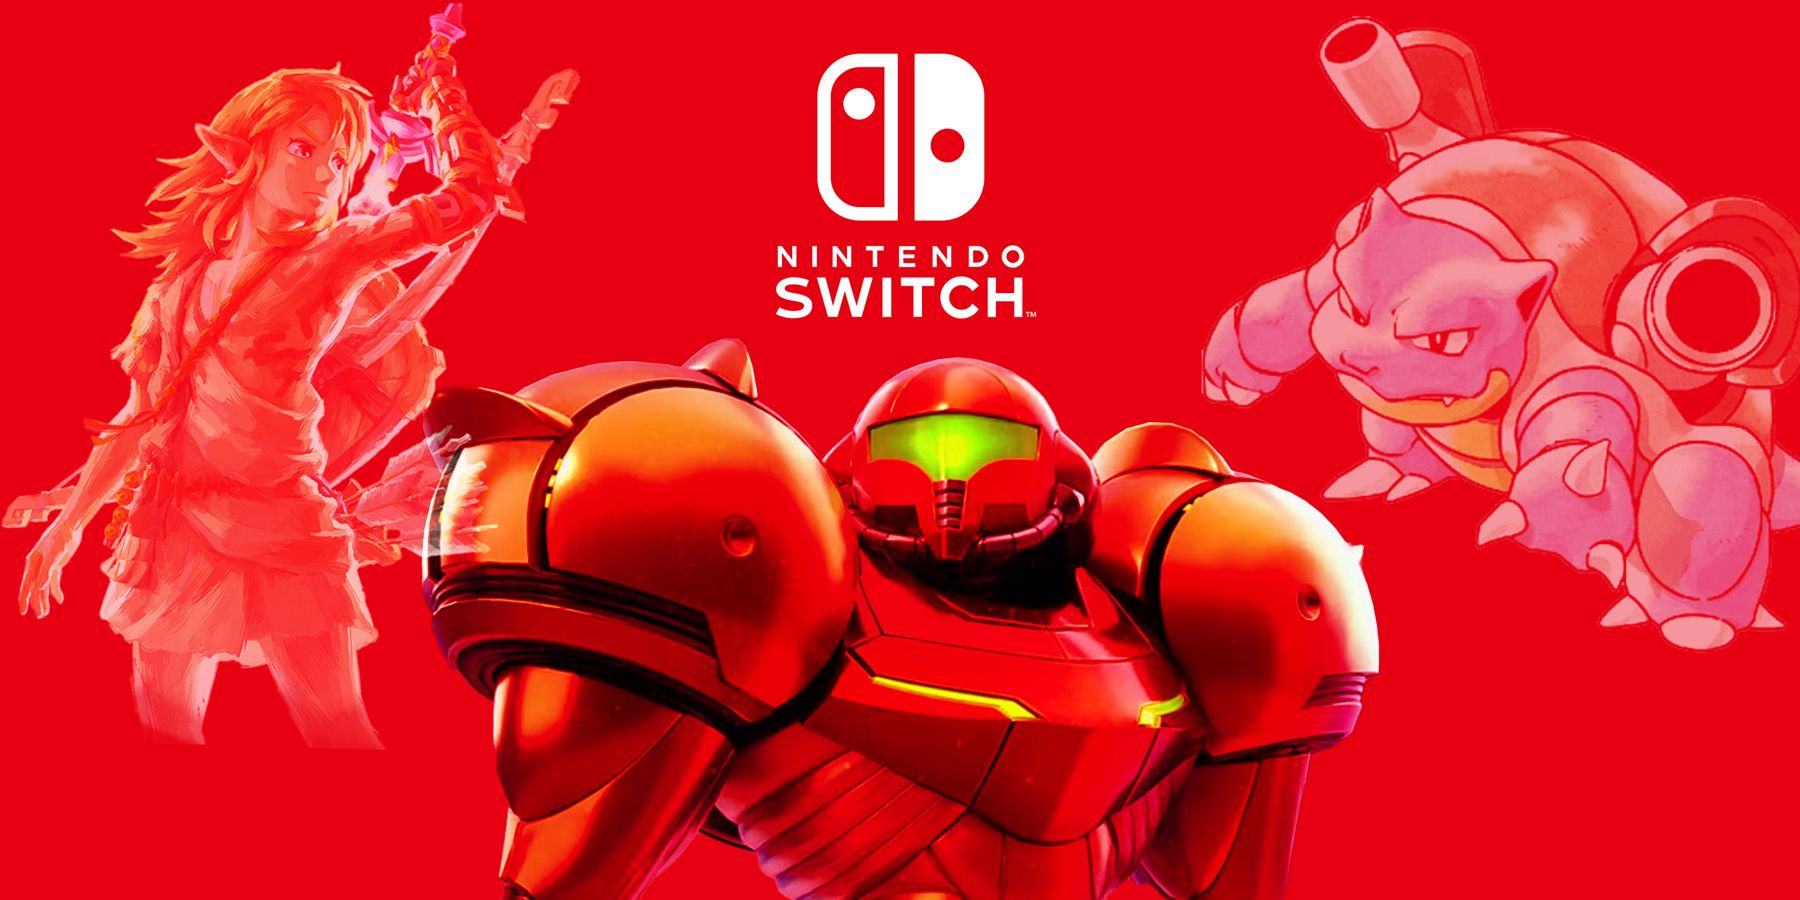 Games That Still Need to Release on Switch Before Its Eventual Successor